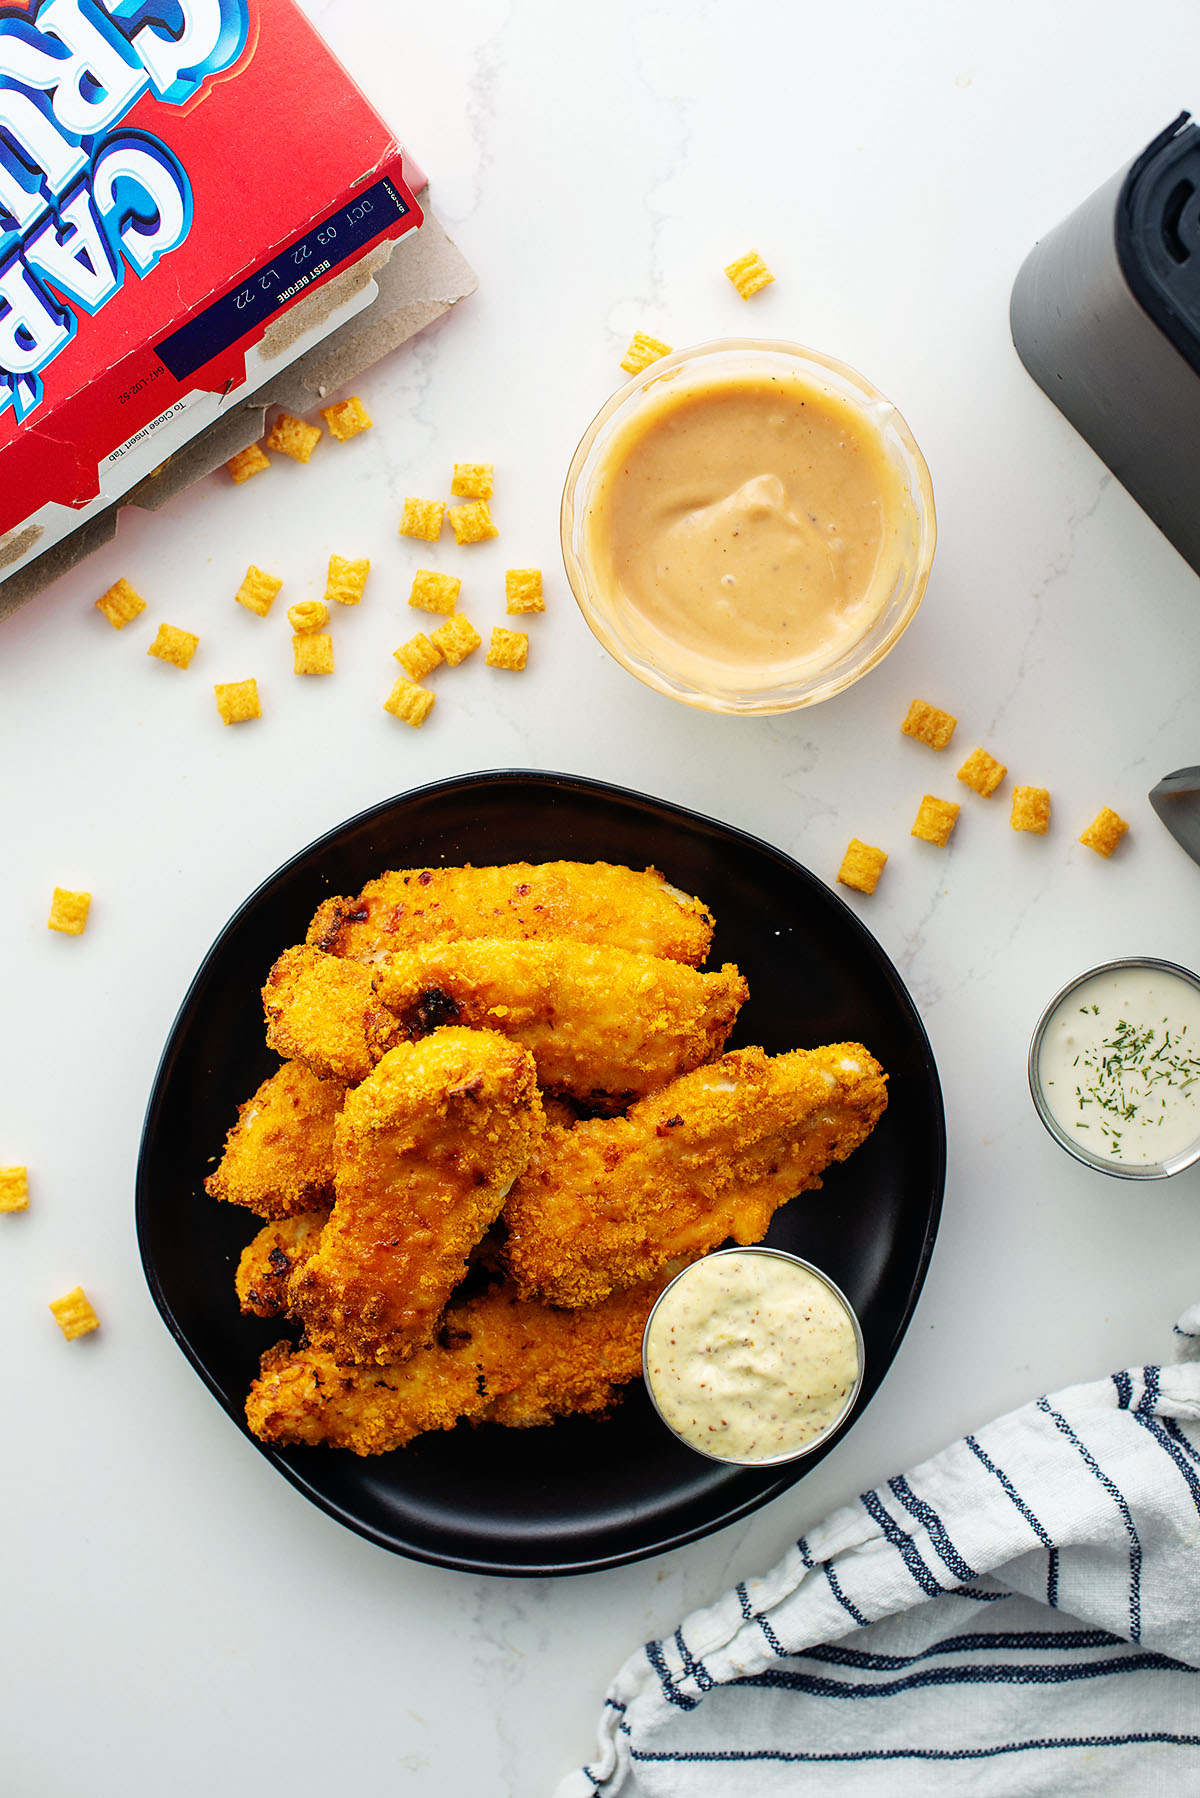 Overhead view of captain crunch cereal next to some chicken strips.